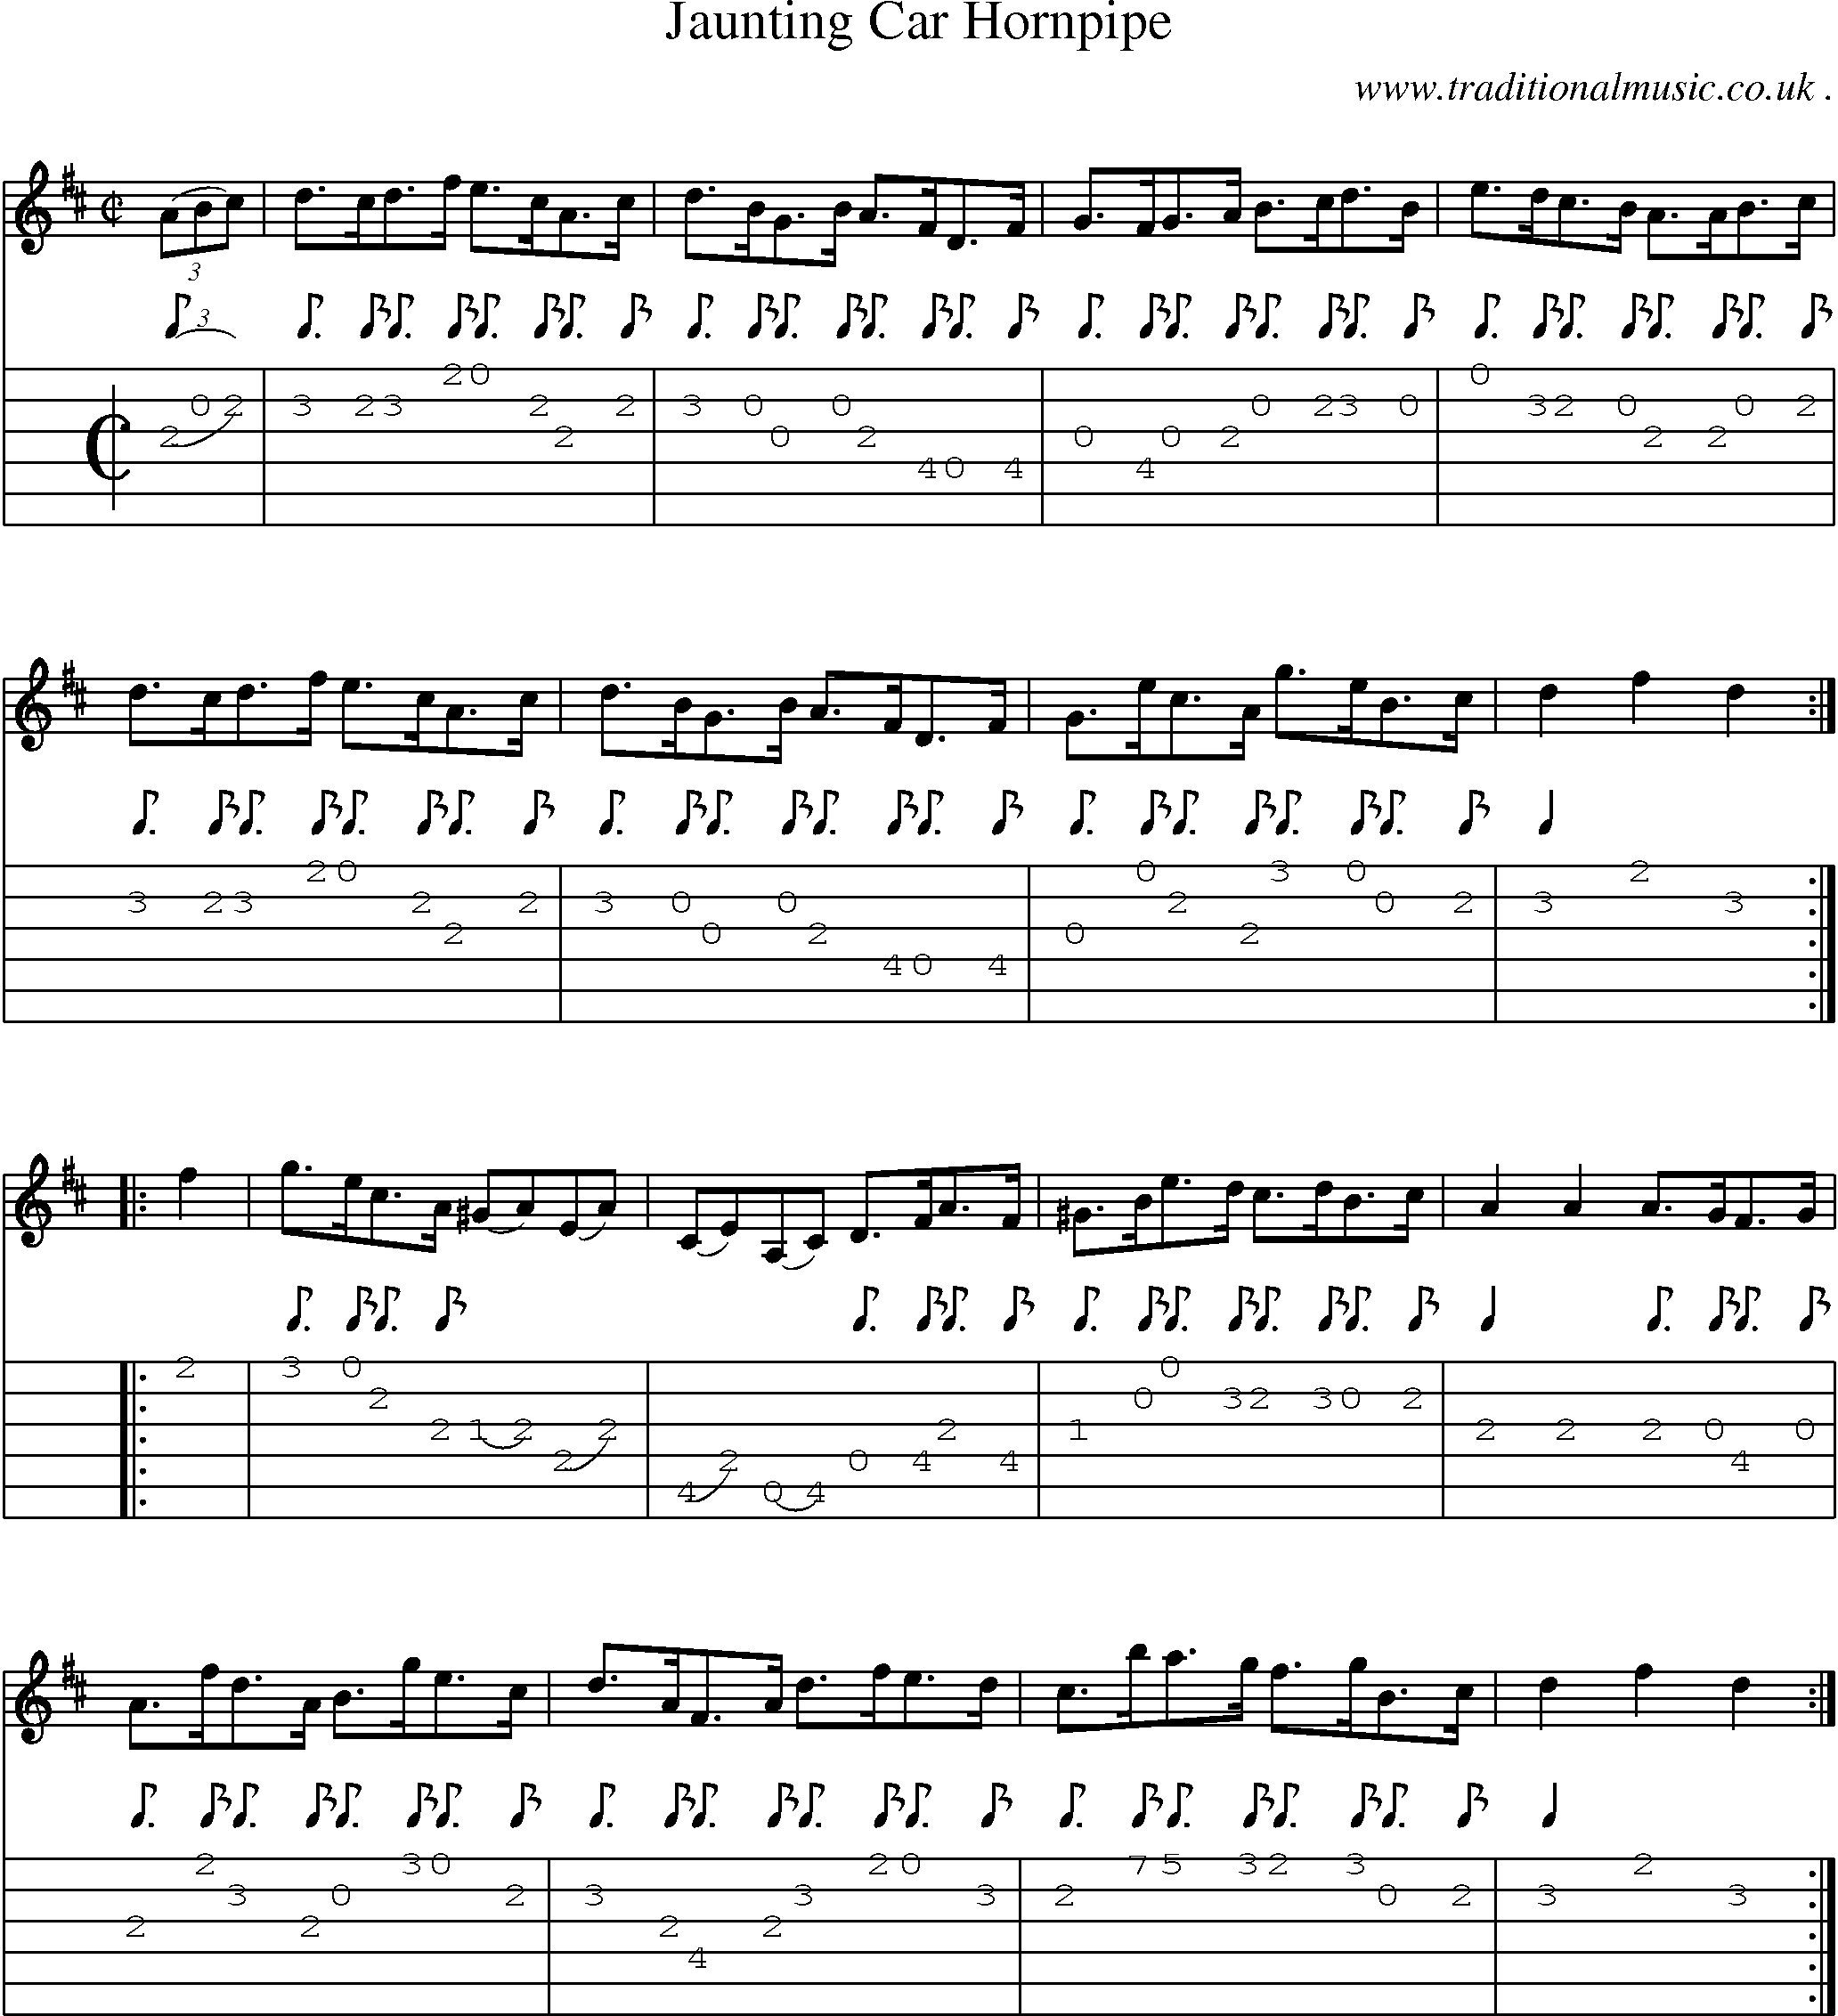 Sheet-Music and Guitar Tabs for Jaunting Car Hornpipe